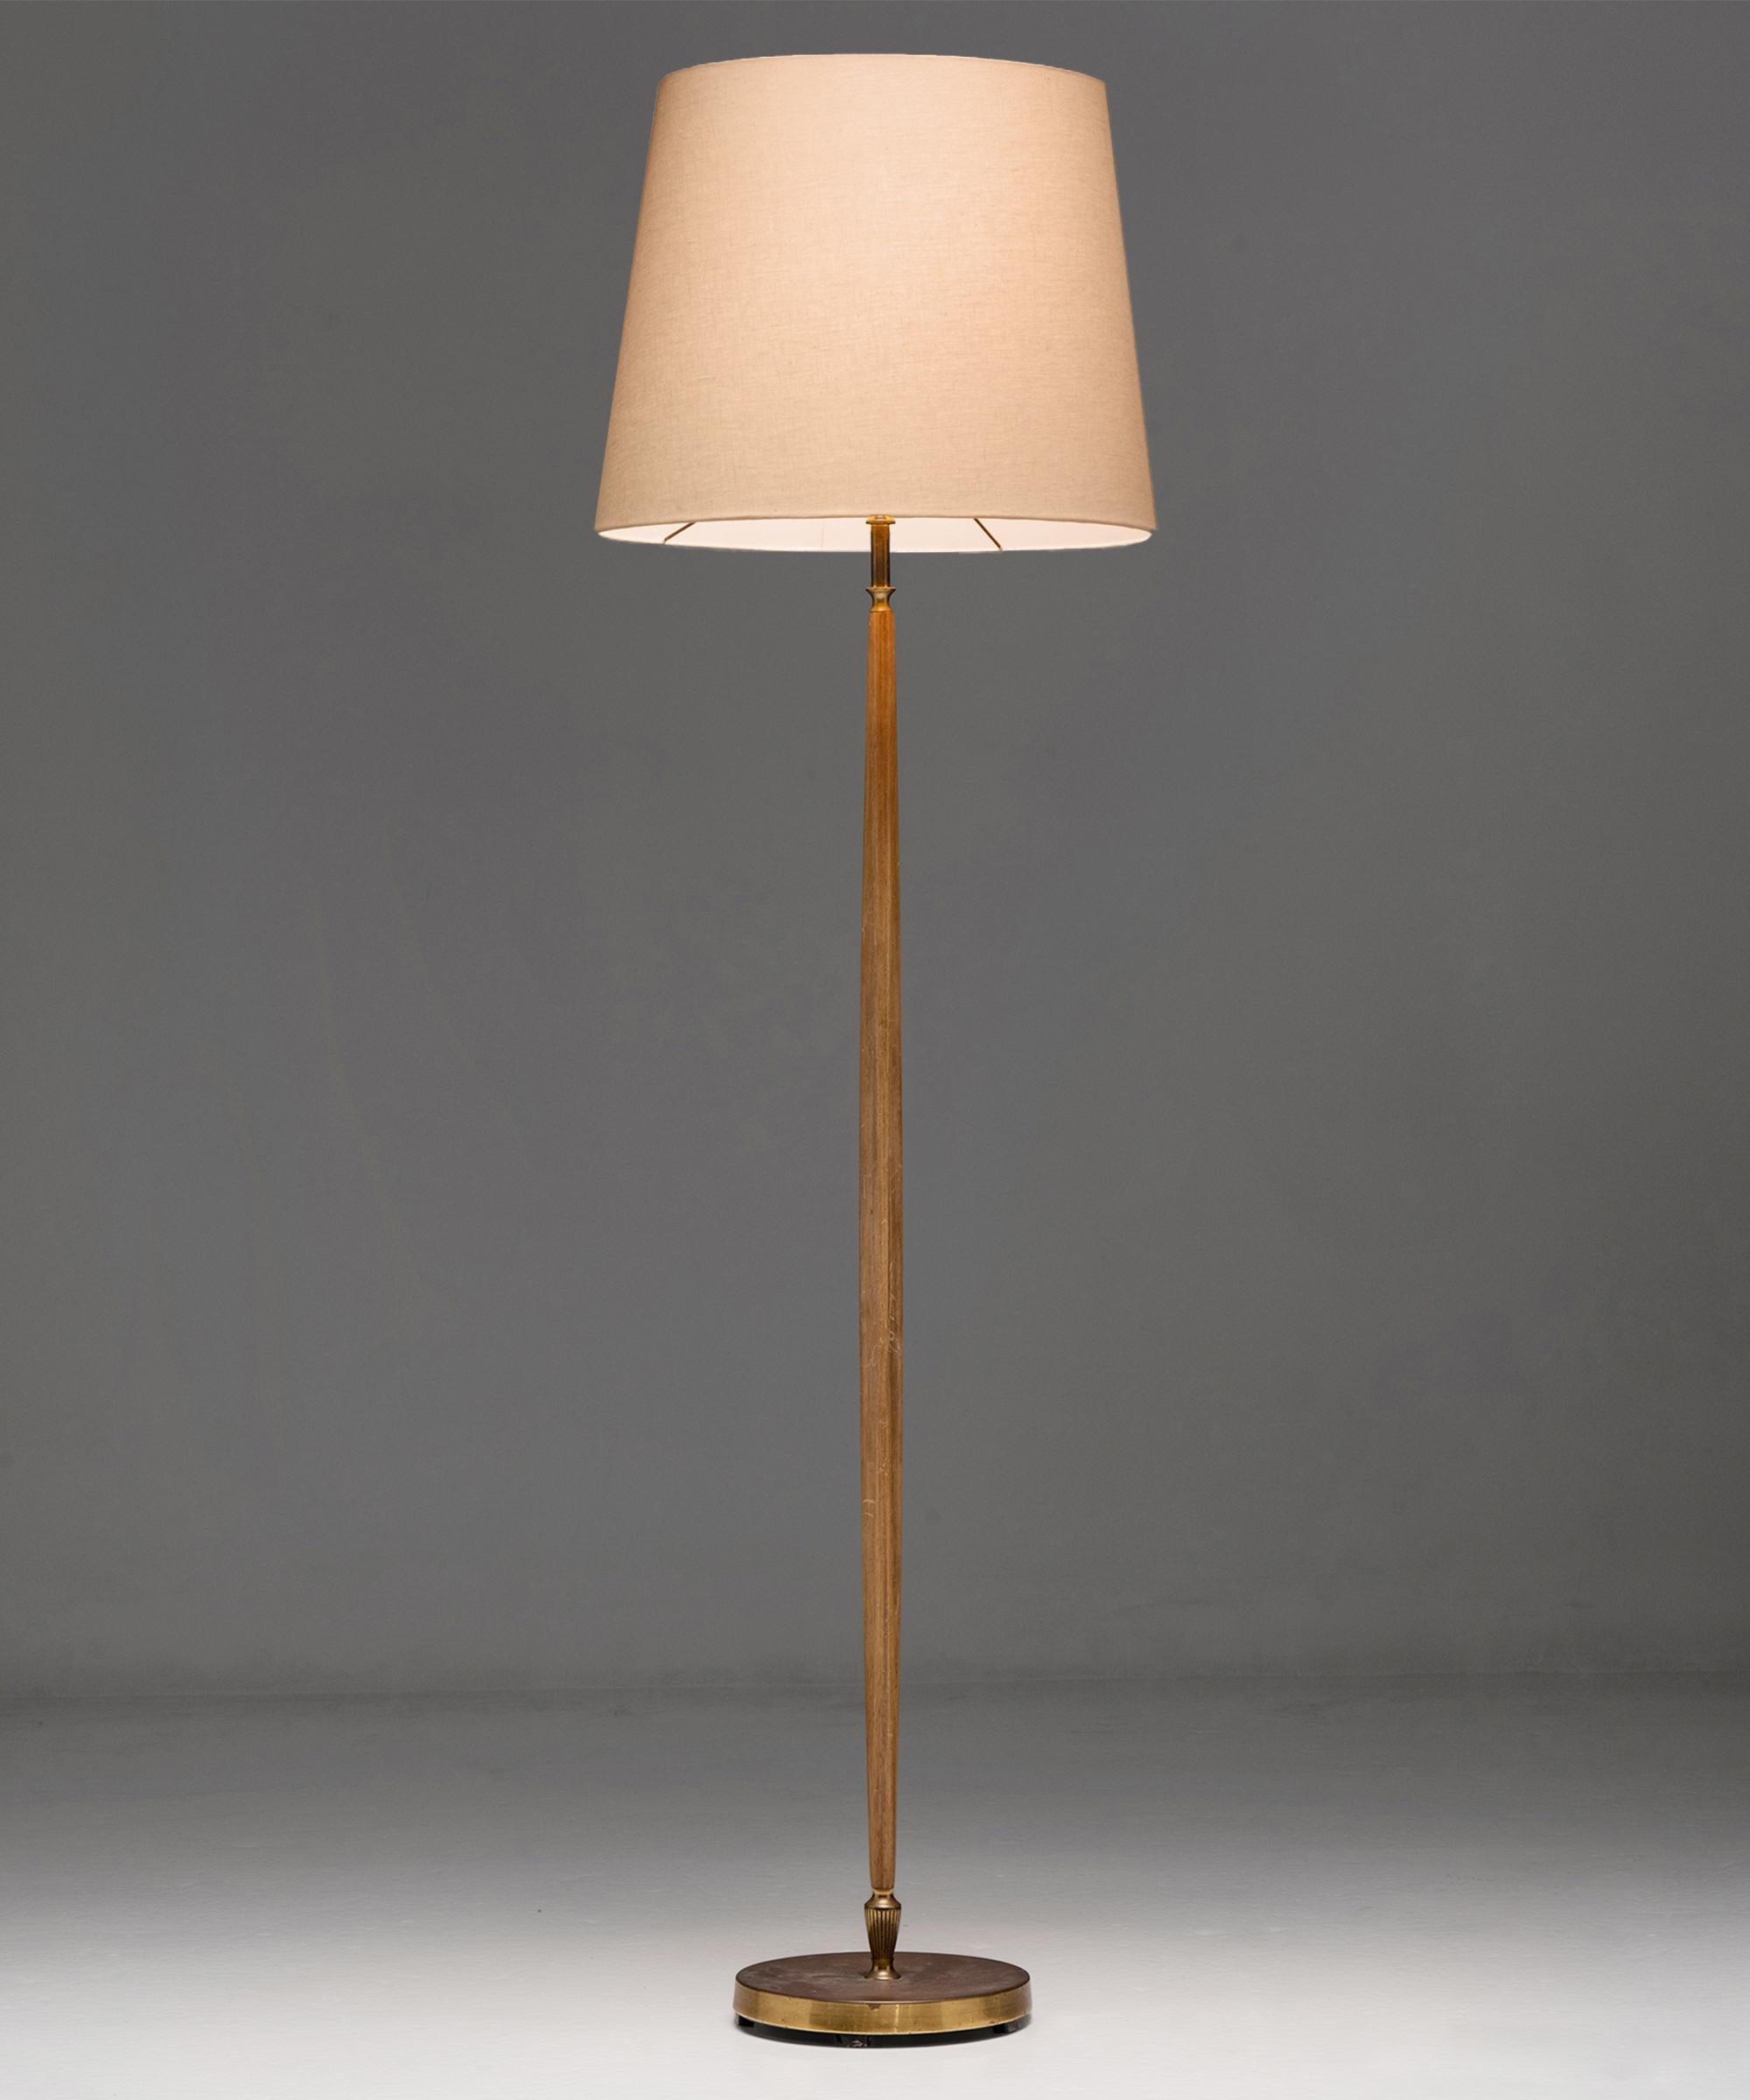 Brass & oak floor lamp

England circa 1950

Elegant floor lamp with oak stand and decorative brass details. On brass base. With new linen shade.

